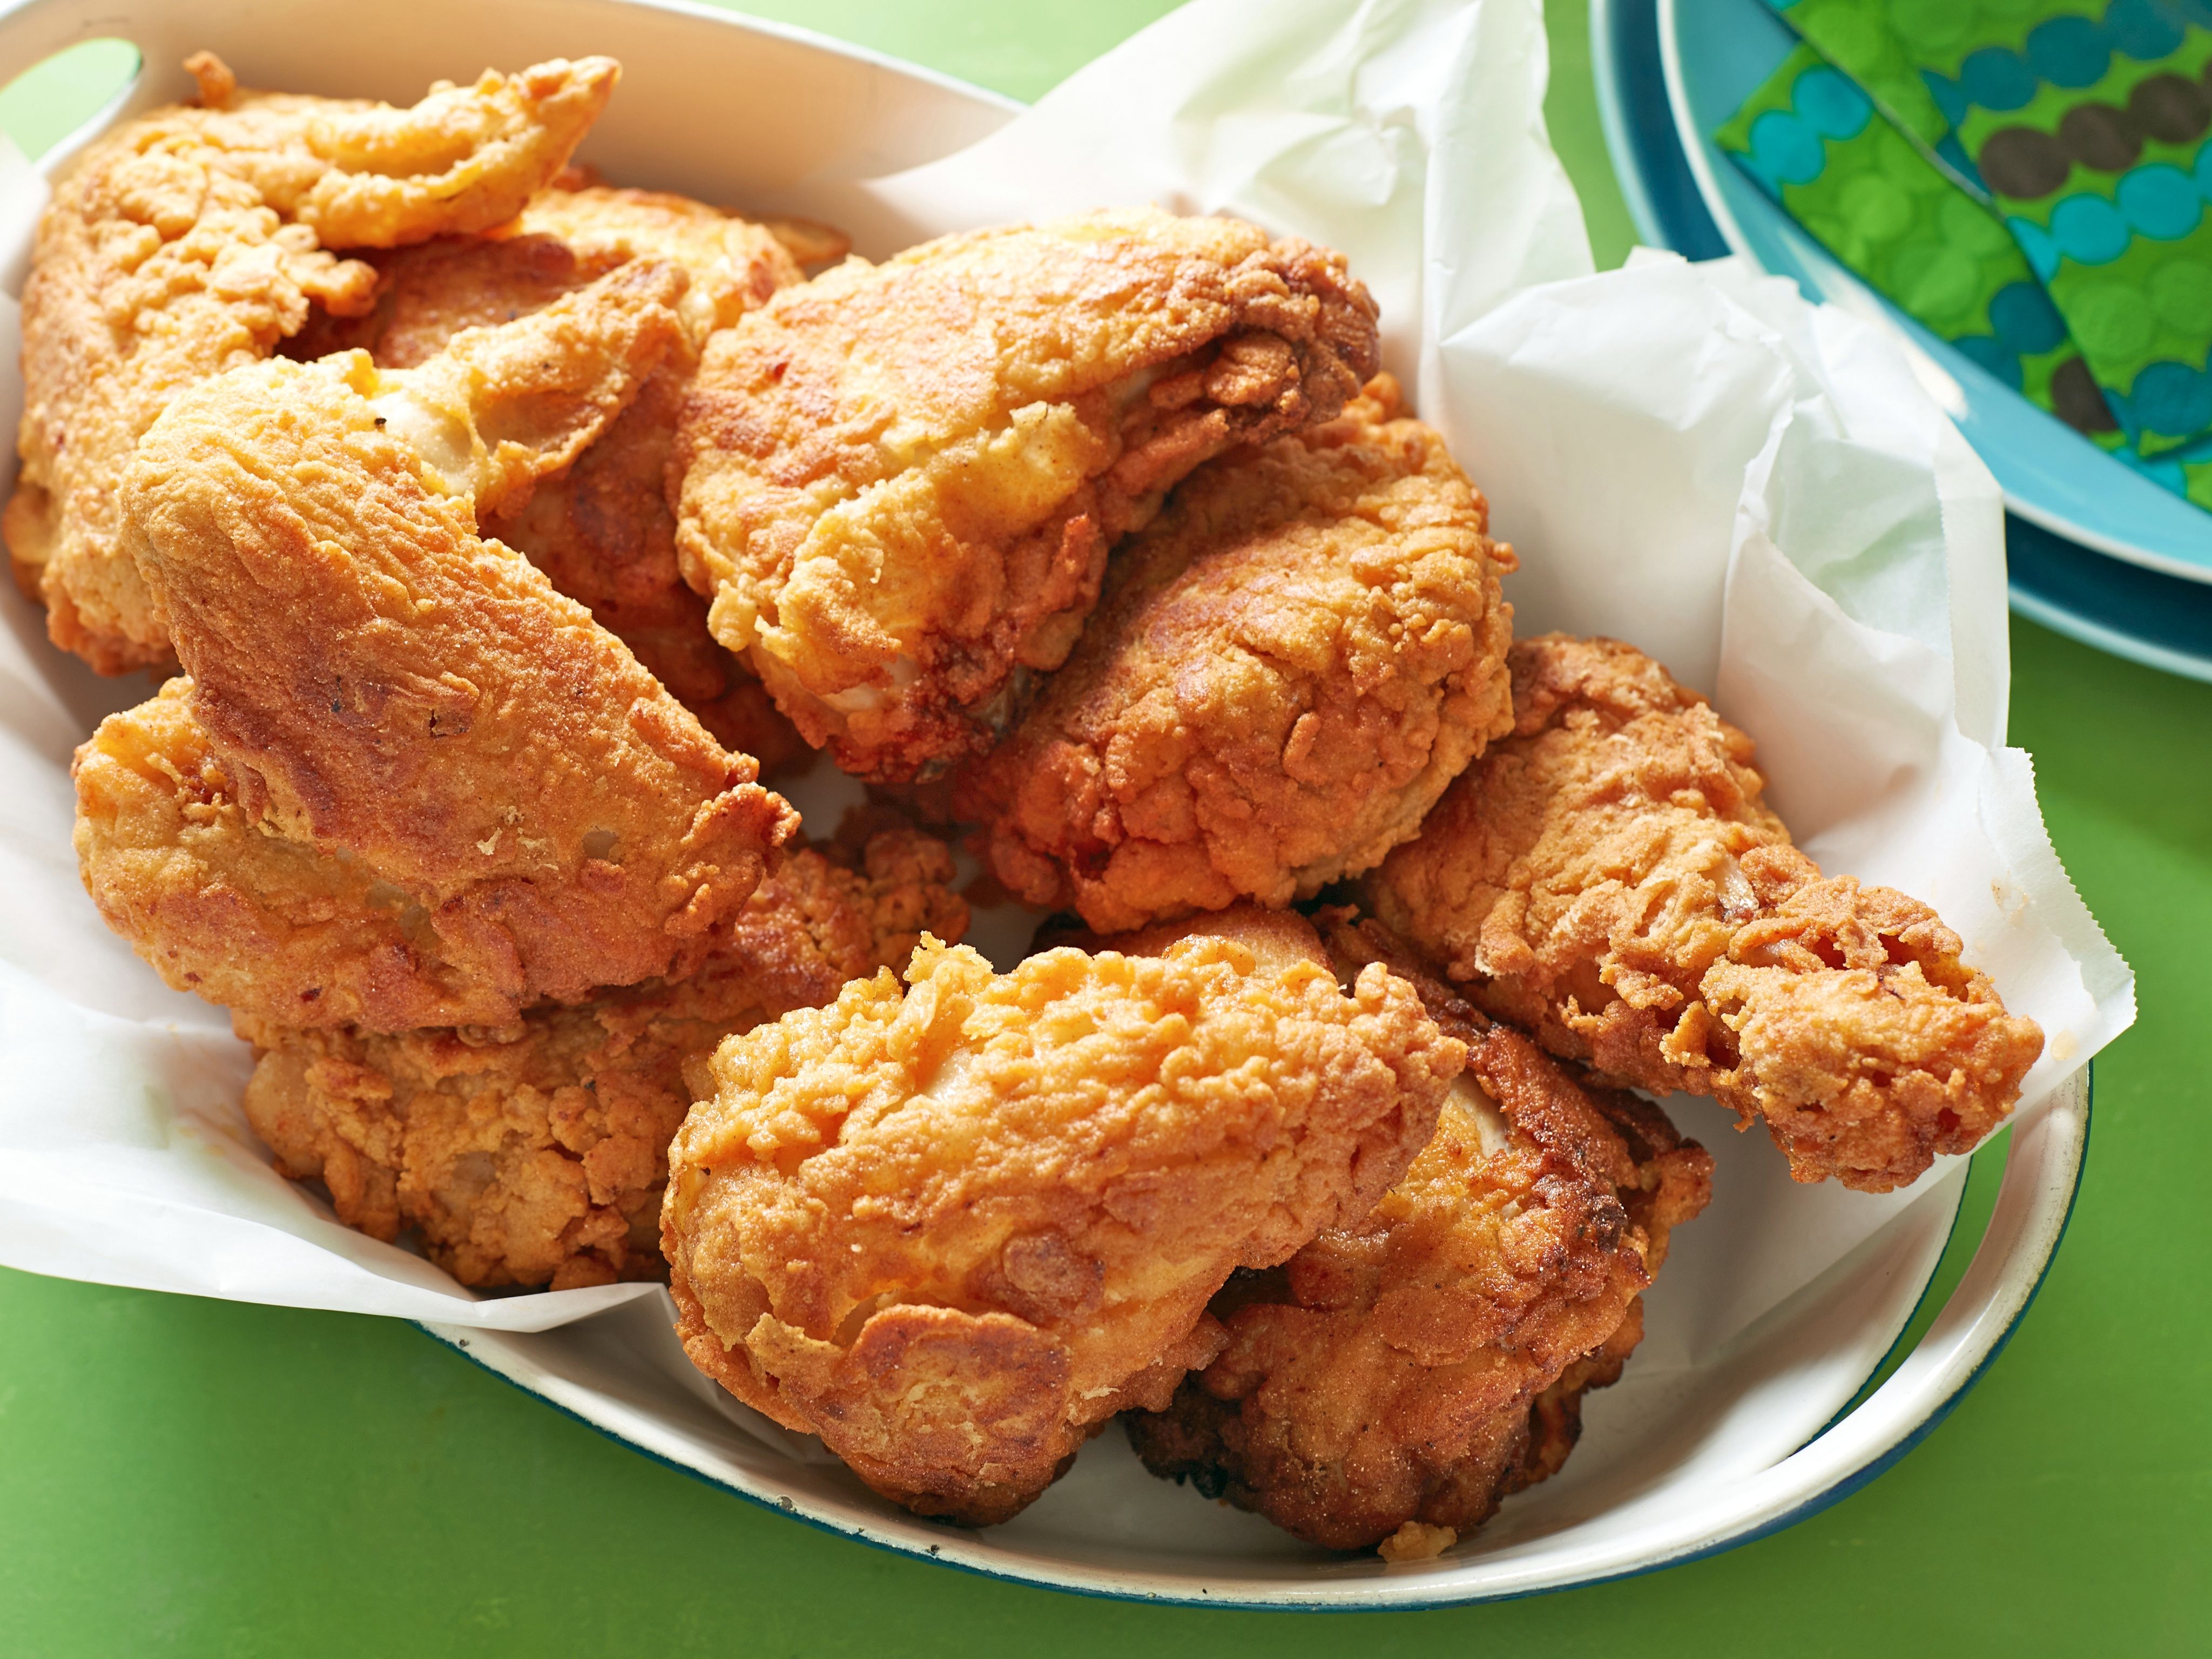 Fried Chicken Wallpapers High Quality.